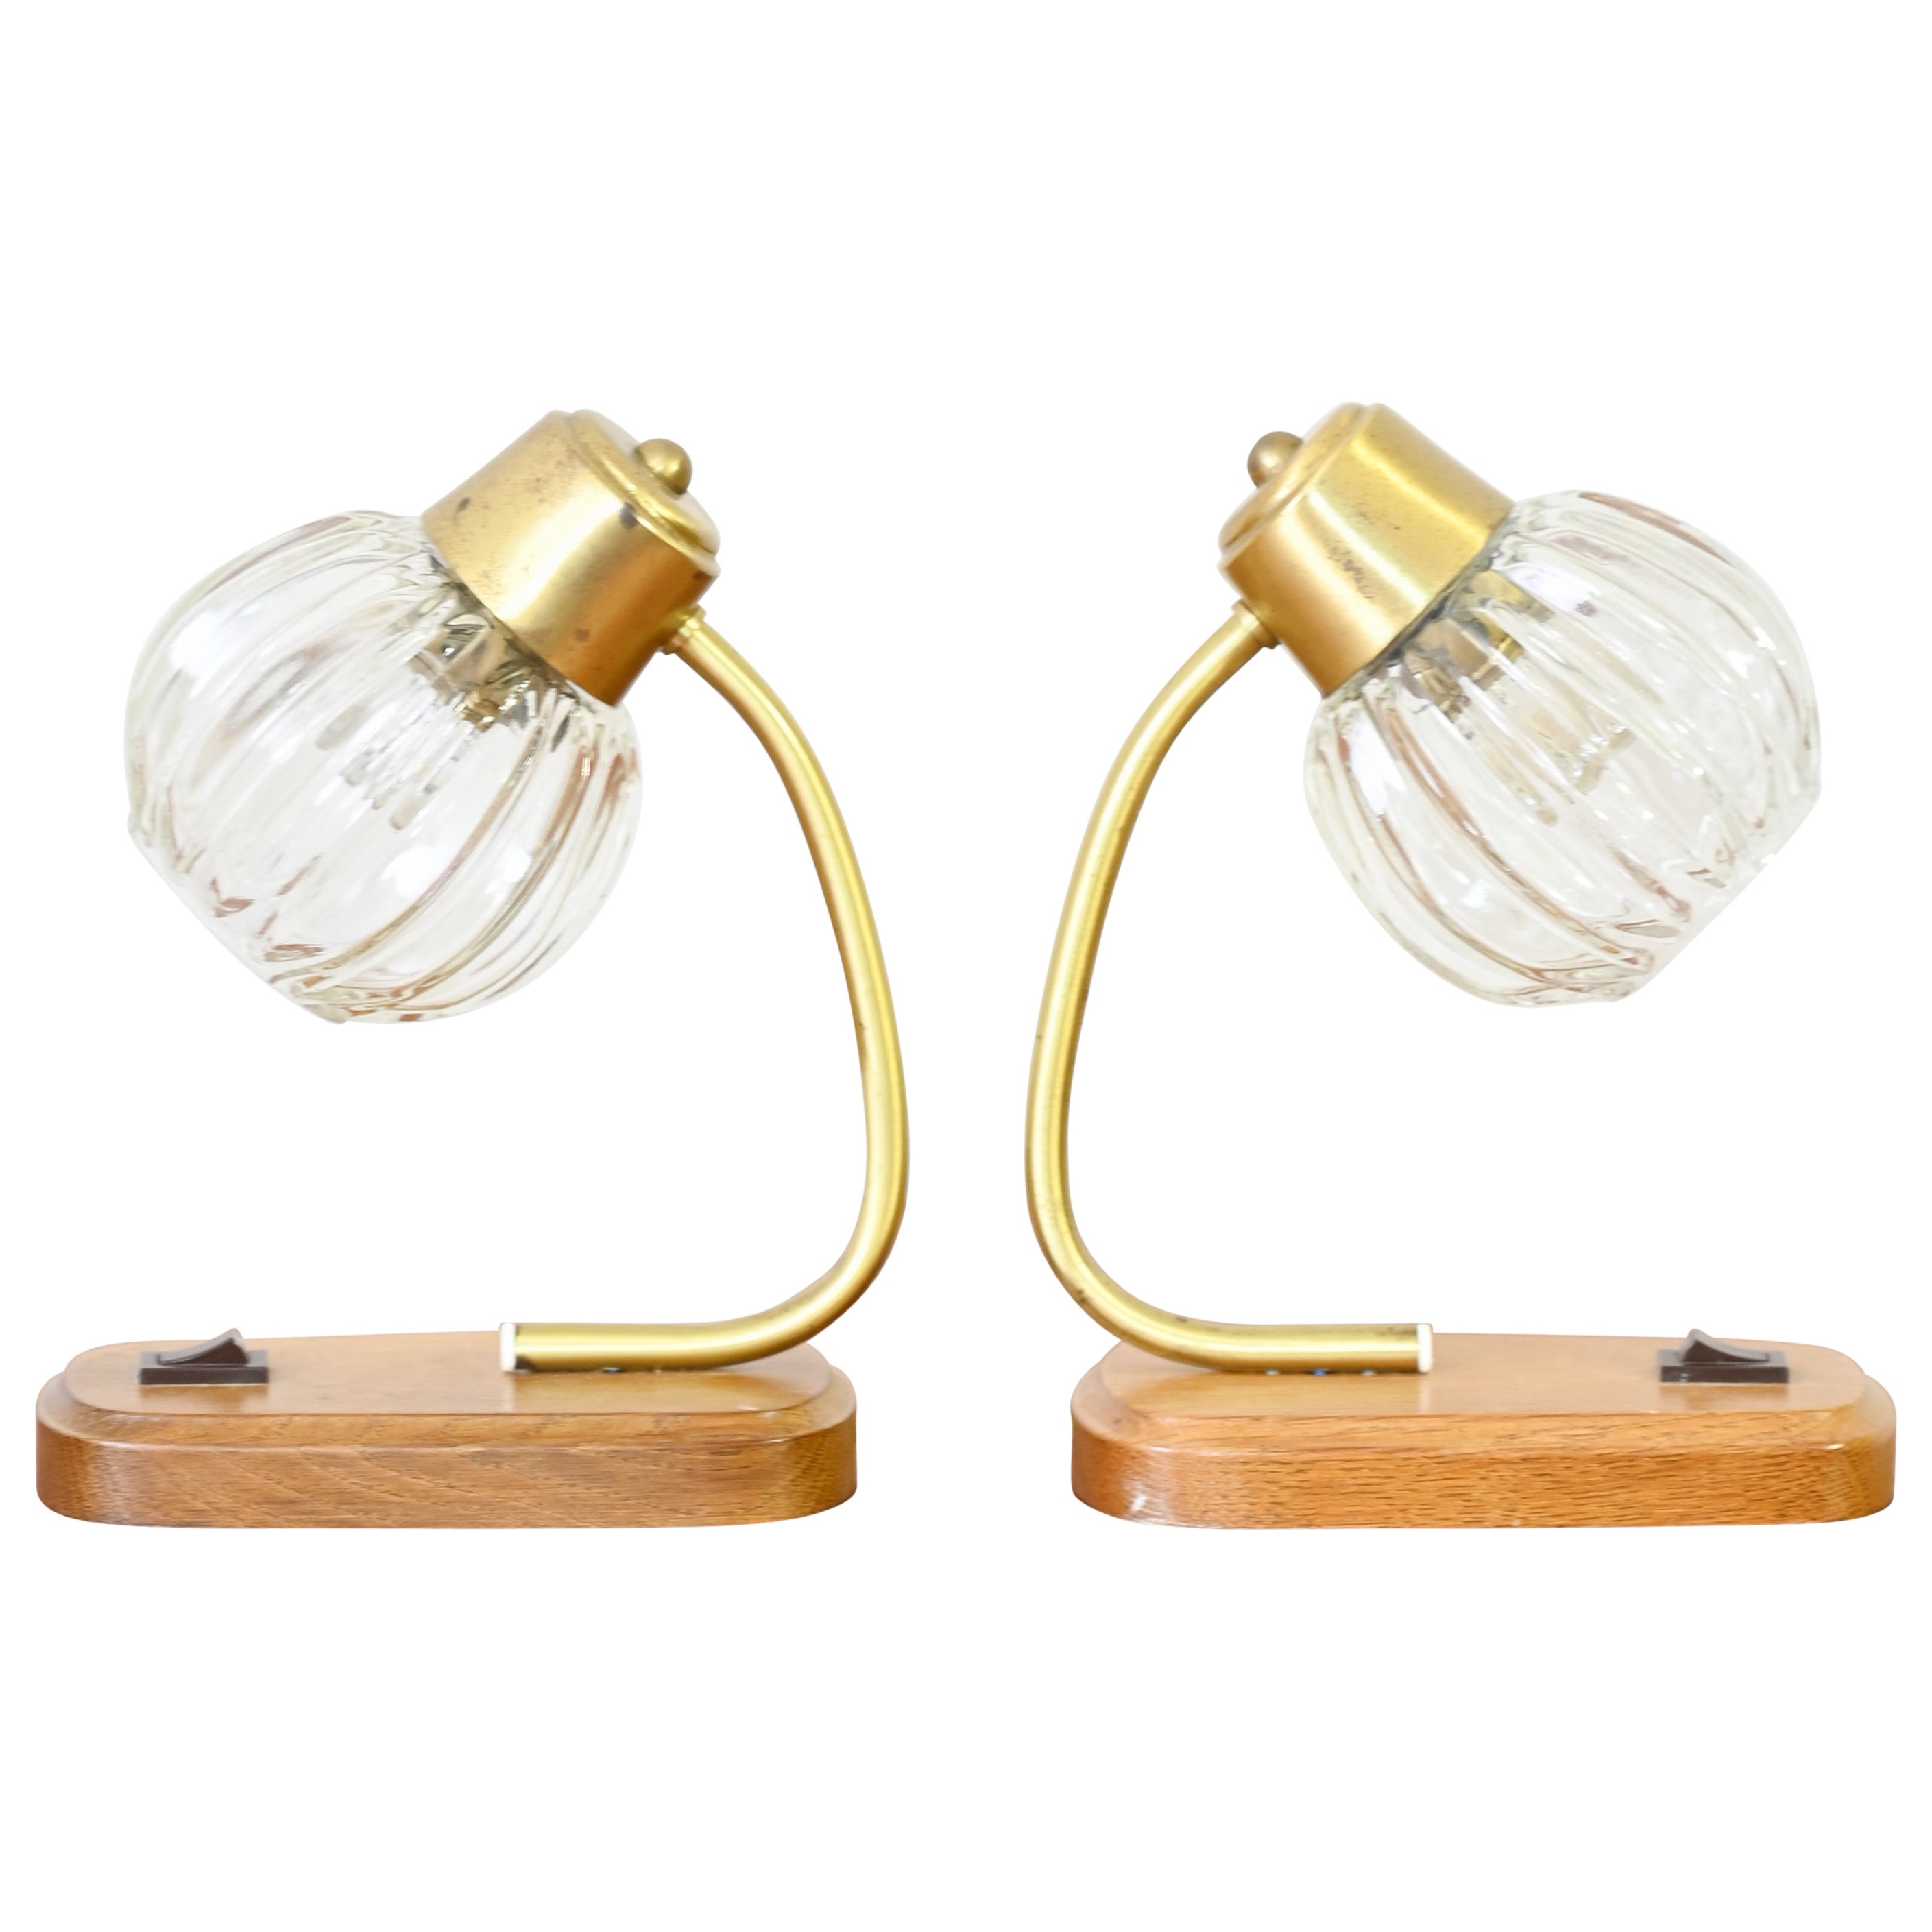 Pair of Abat-Jours by Paul Neuhaus For Sale at 1stDibs